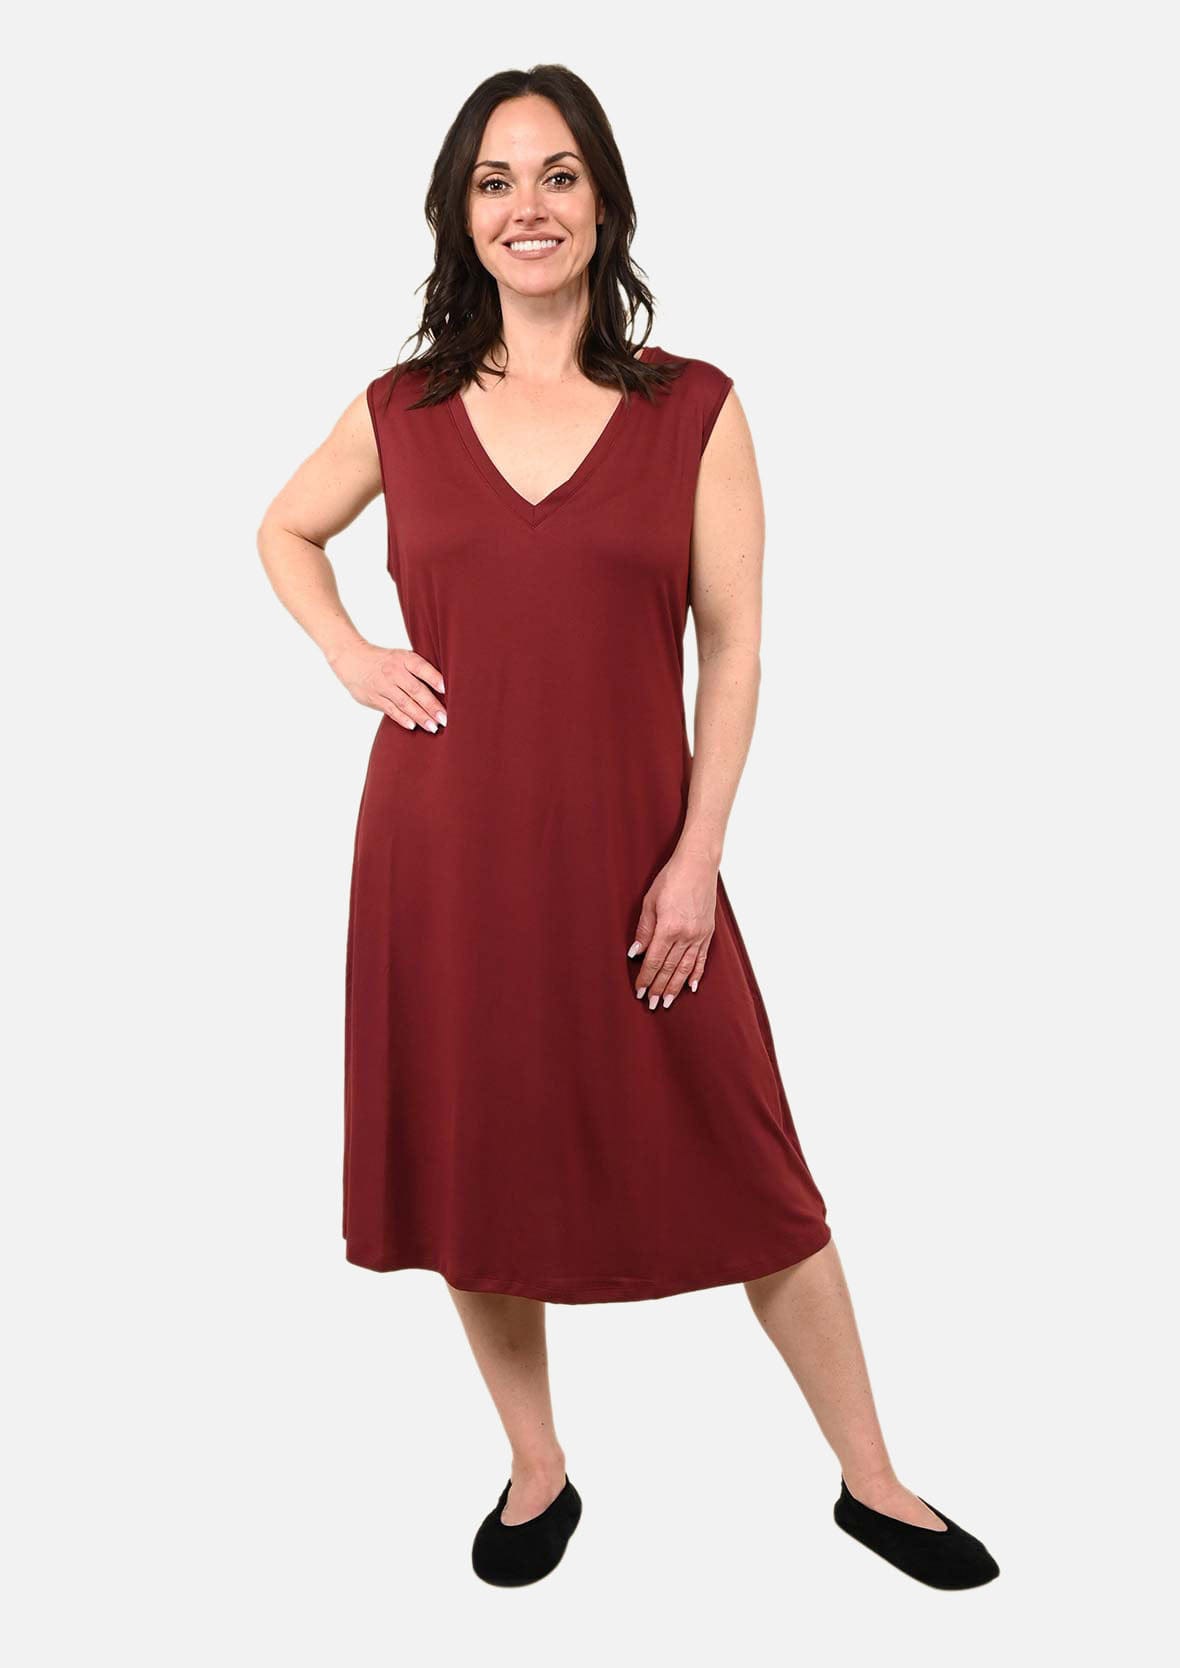 sleeveless v-neck red dress #color_Berry Red